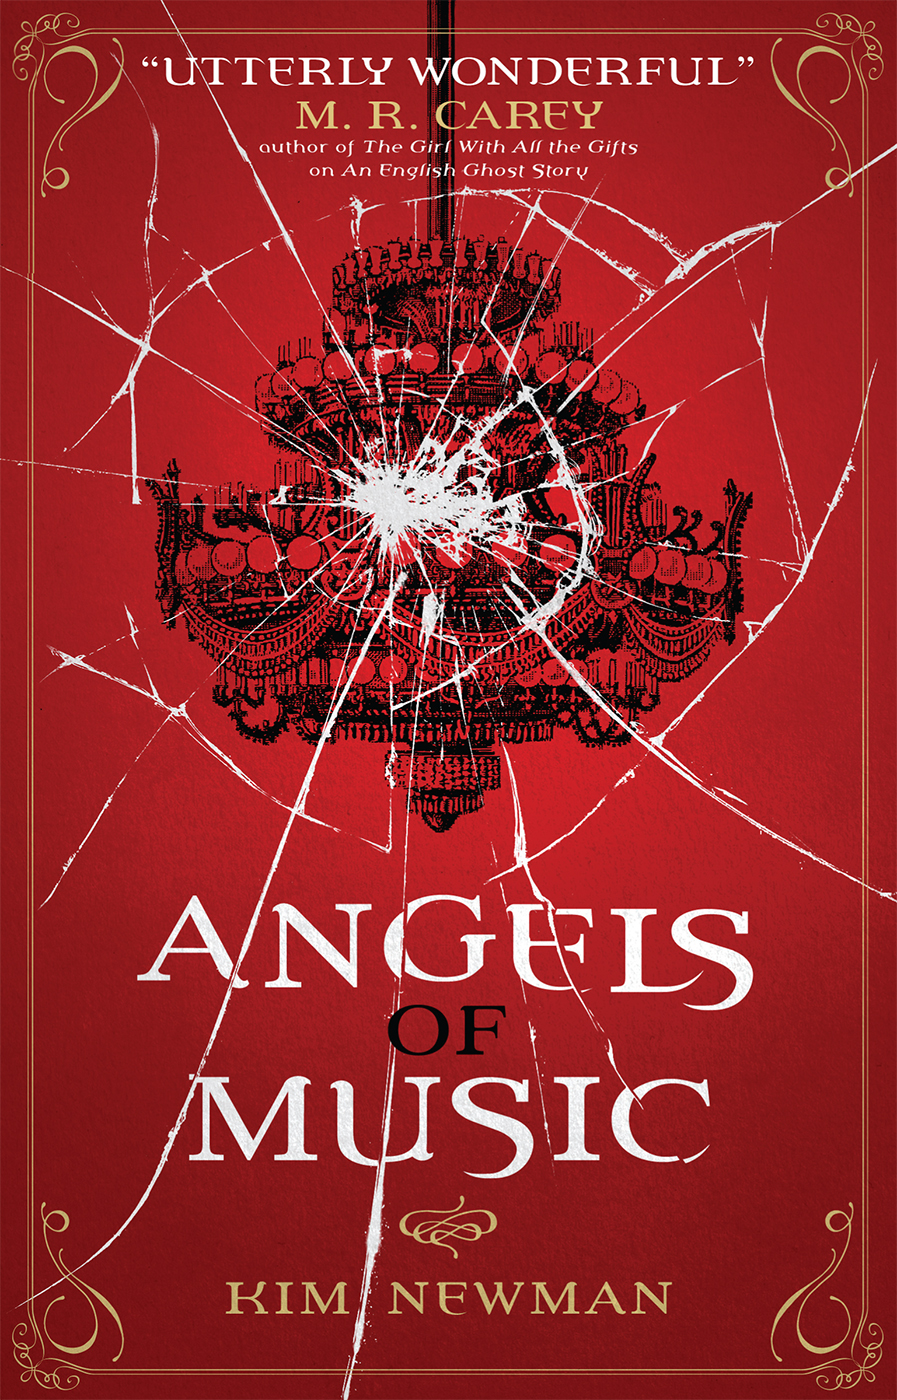 Angels of Music by Kim Newman